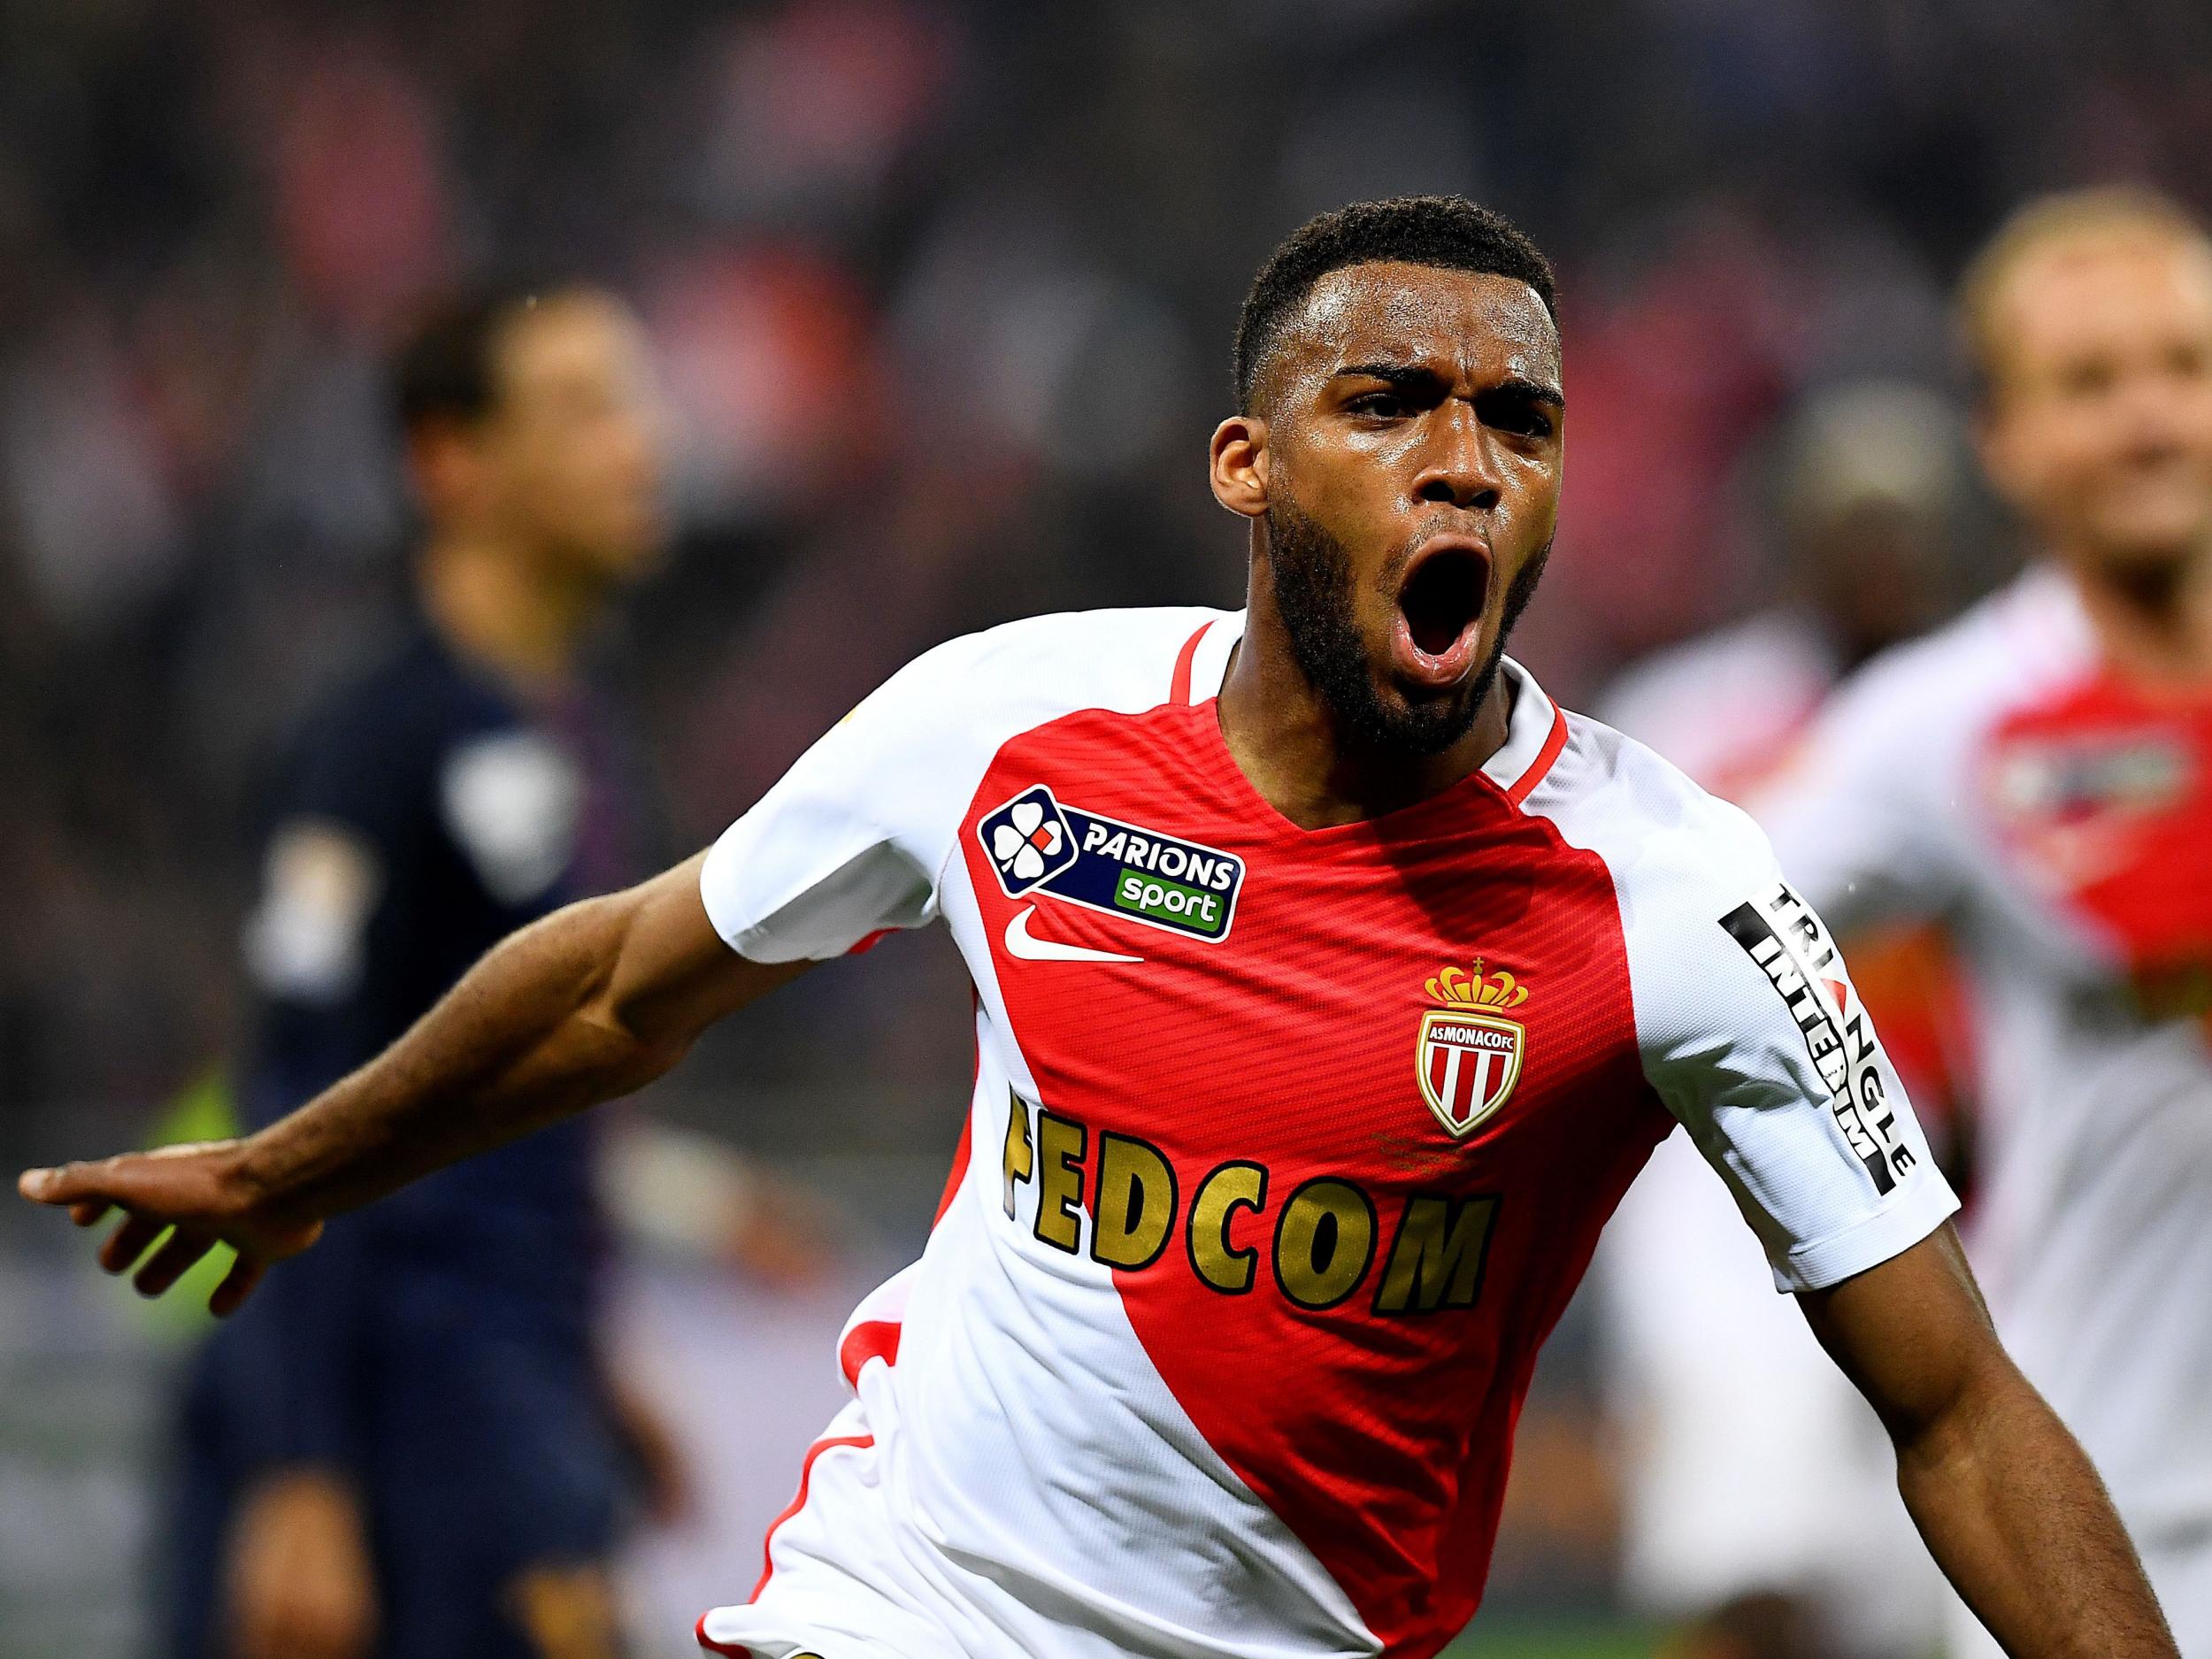 Lemar is a player Monaco are desperate to keep